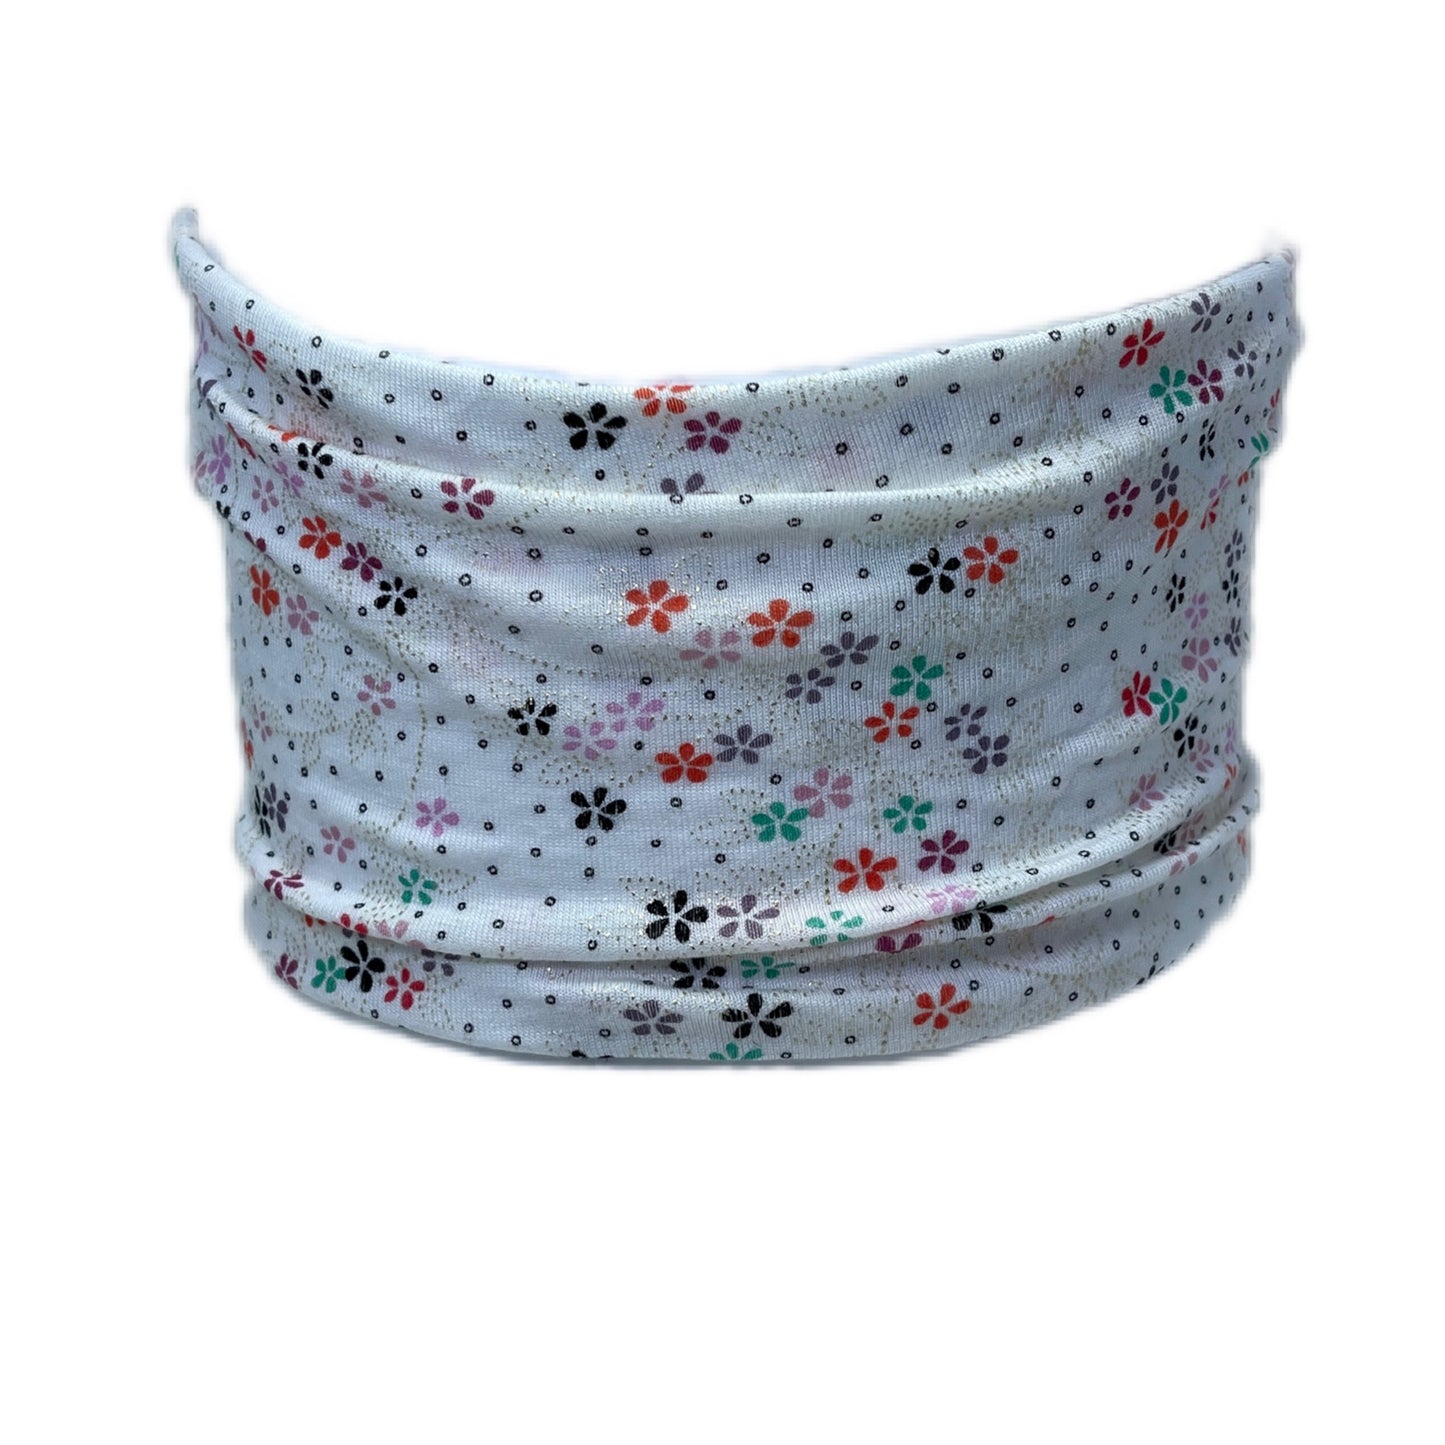 Daisy Yoga Head Wrap - Stretchy and Comfortable for All Levels